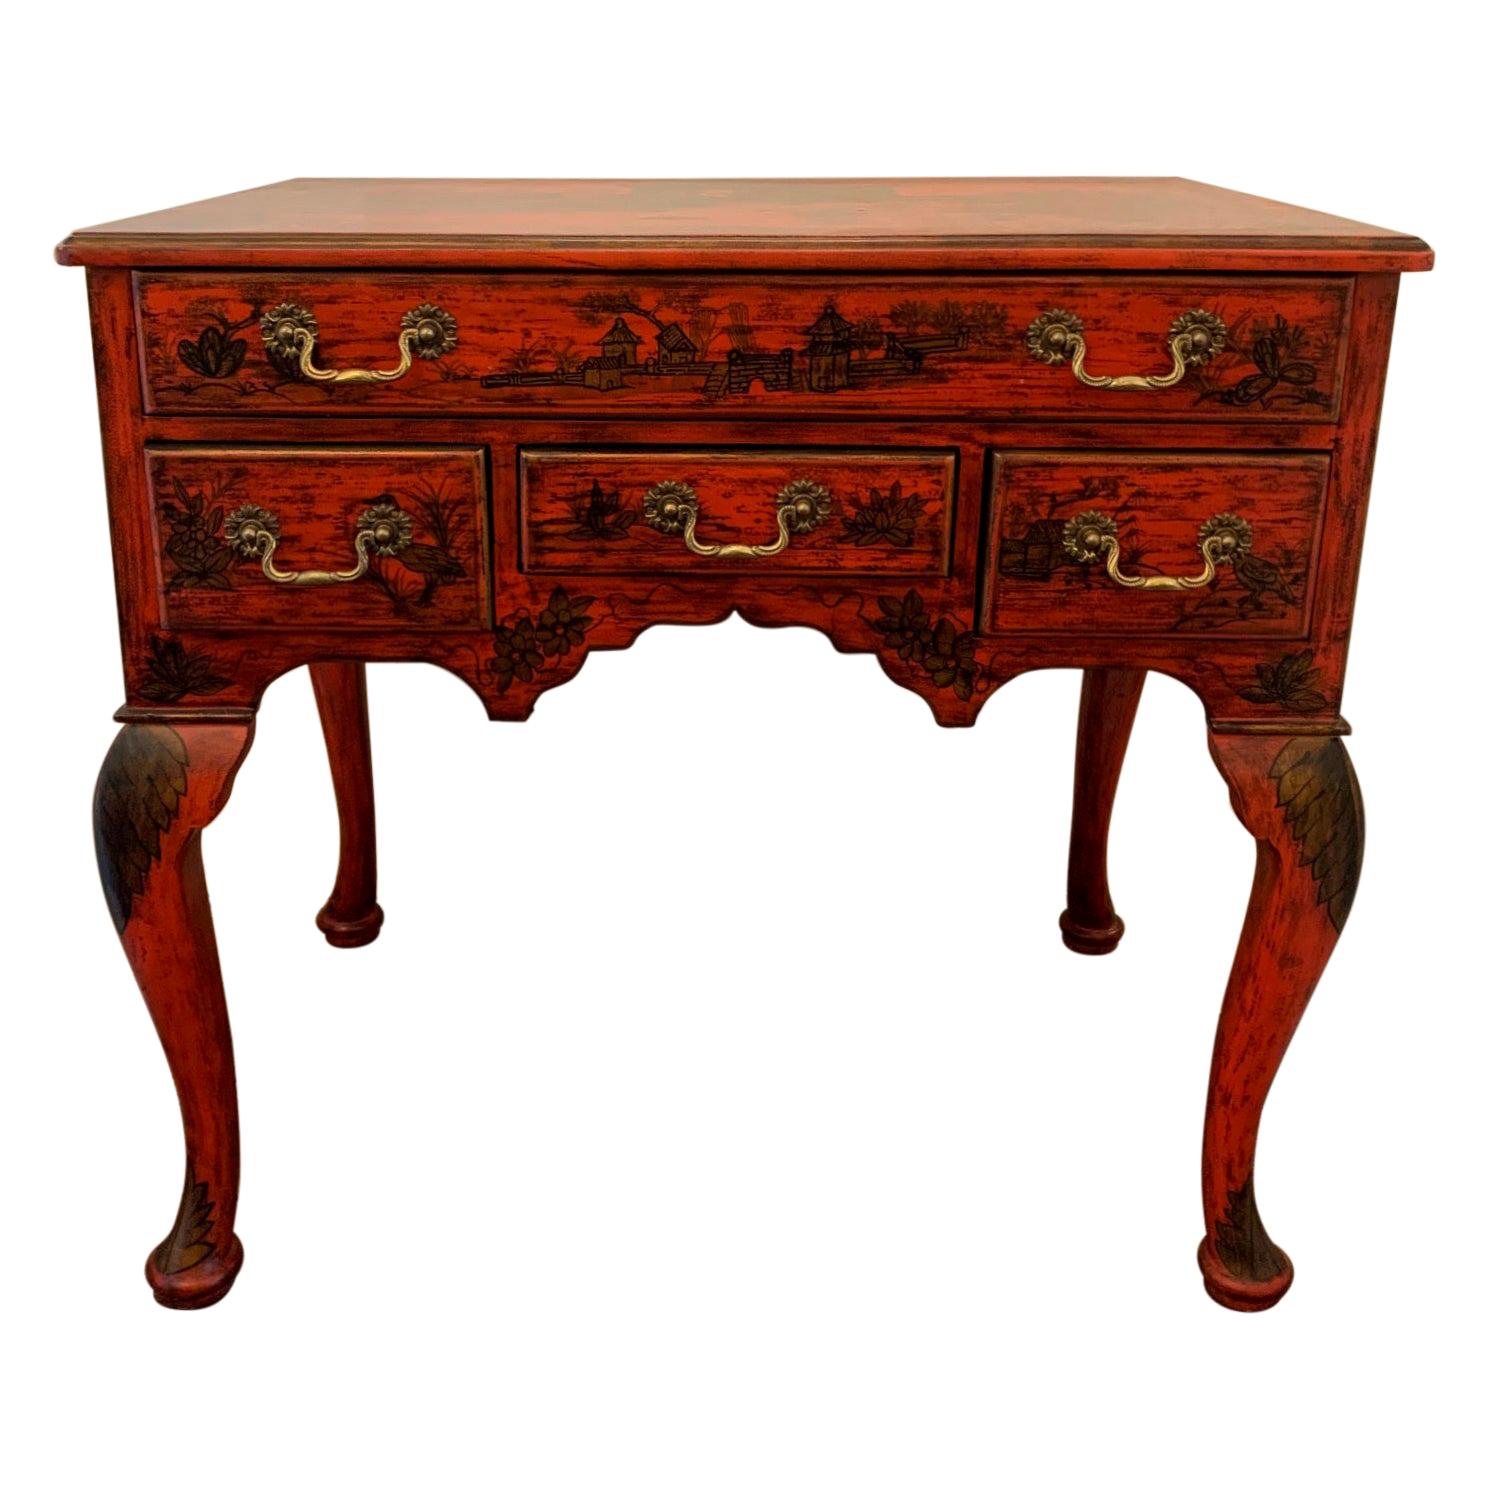 Scully & Scully Red & Gold Chinoiserie Console Sideboard with Drawers